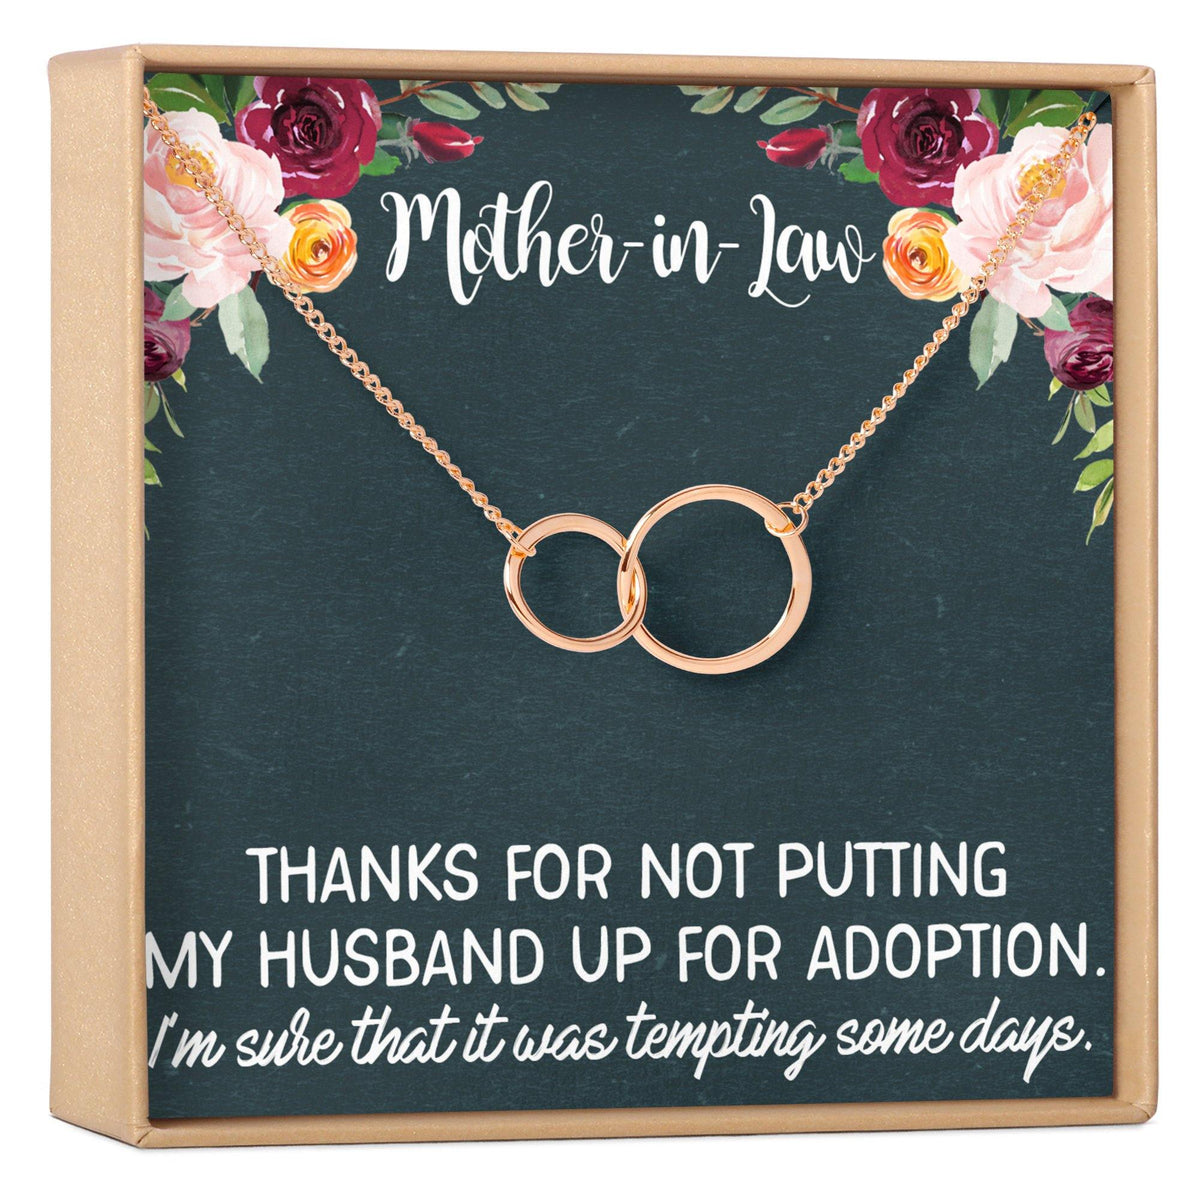 Mother-In-Law Necklace - Dear Ava, Jewelry / Necklaces / Pendants